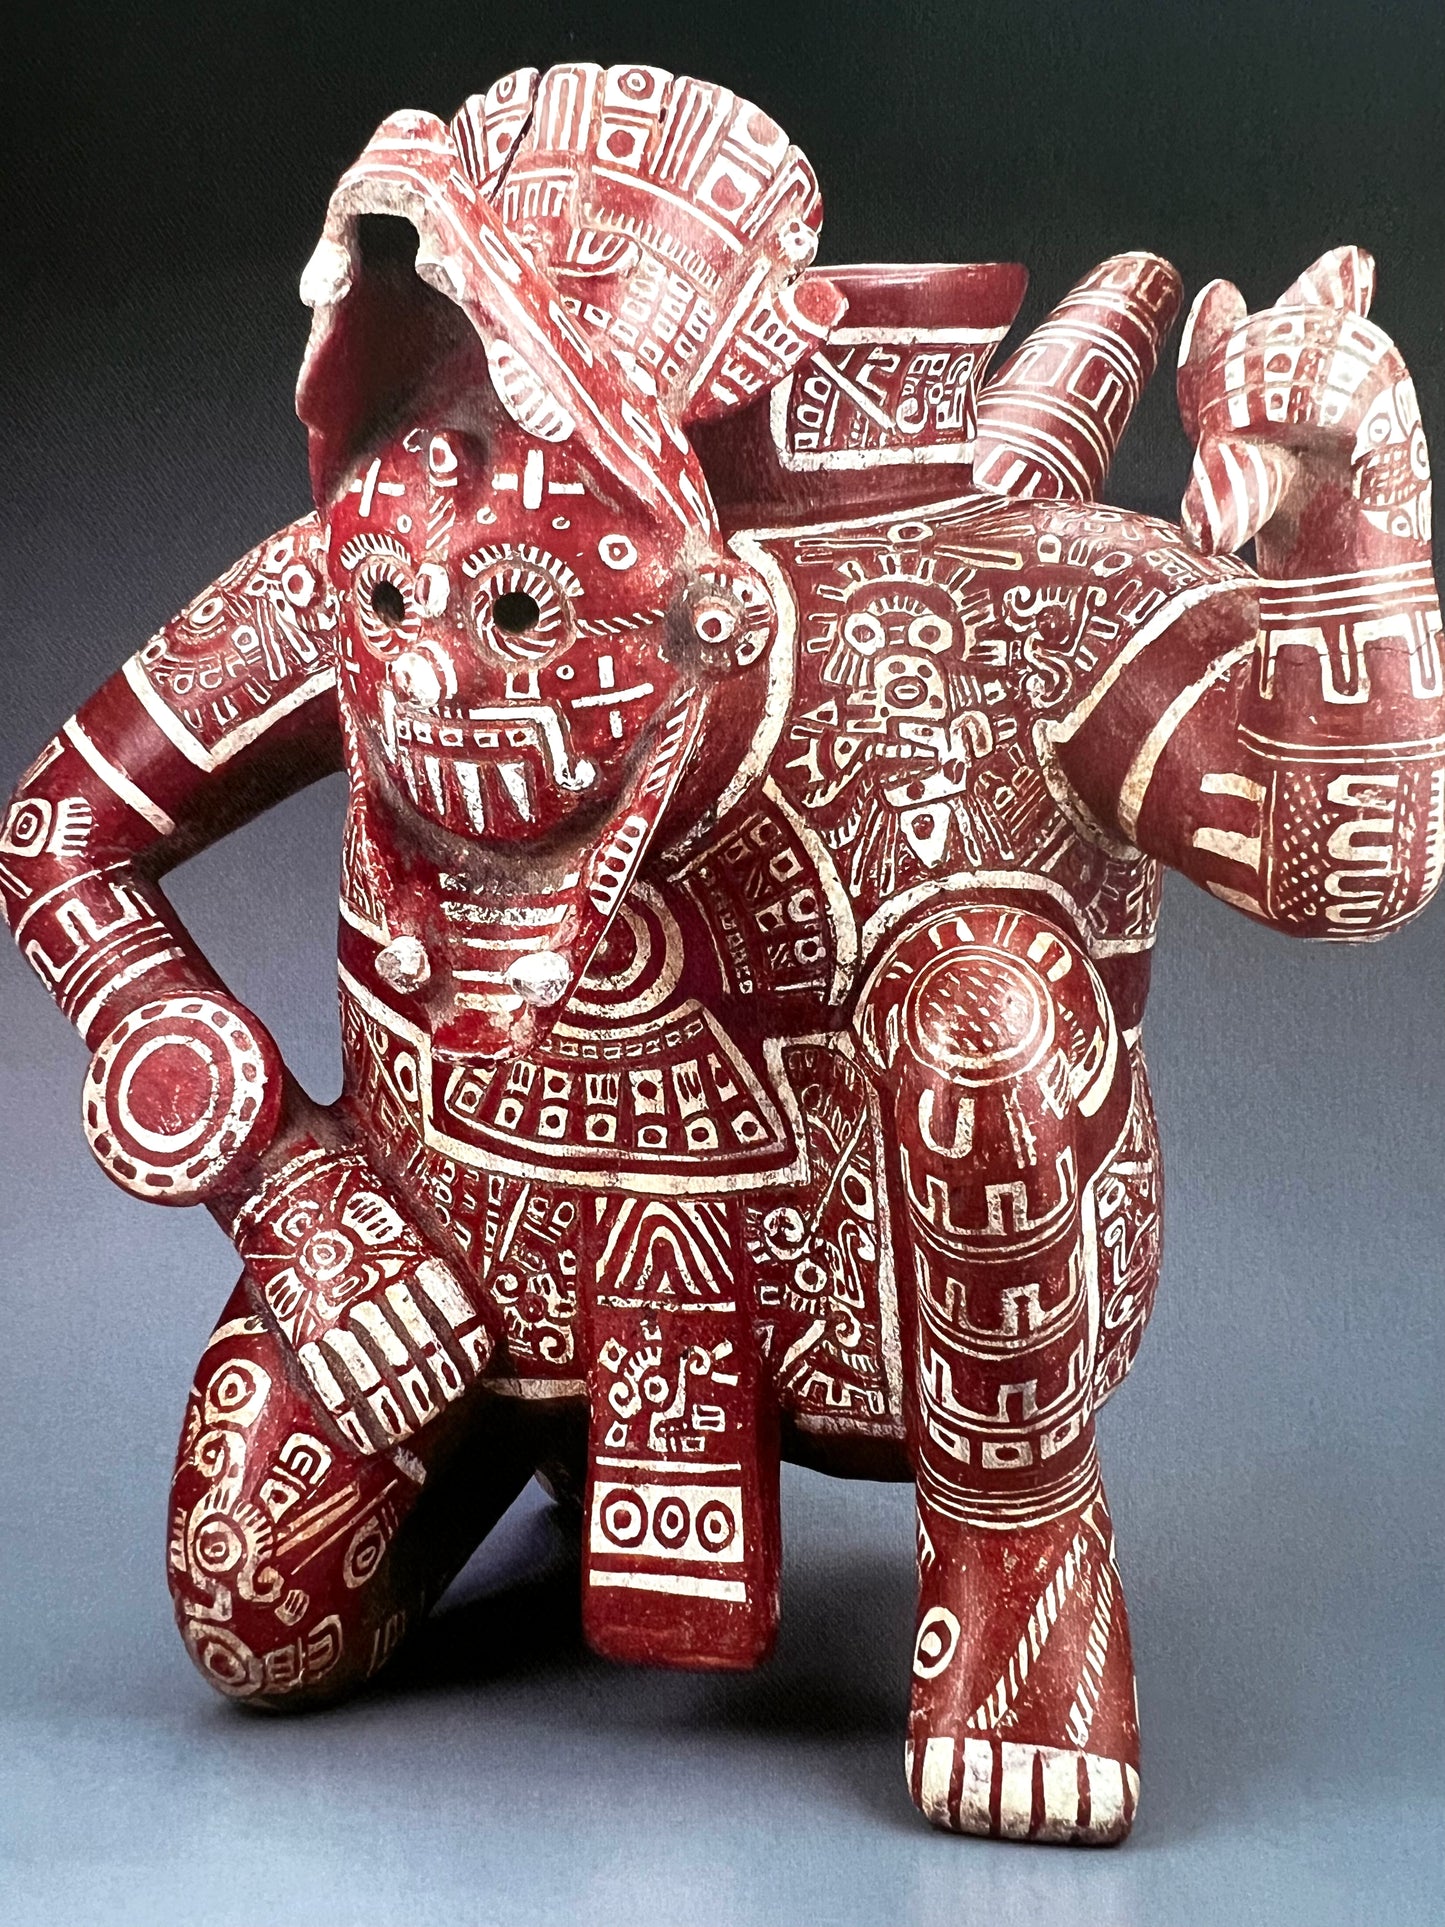 The Road to Aztlan: Art from a Mythic Homeland